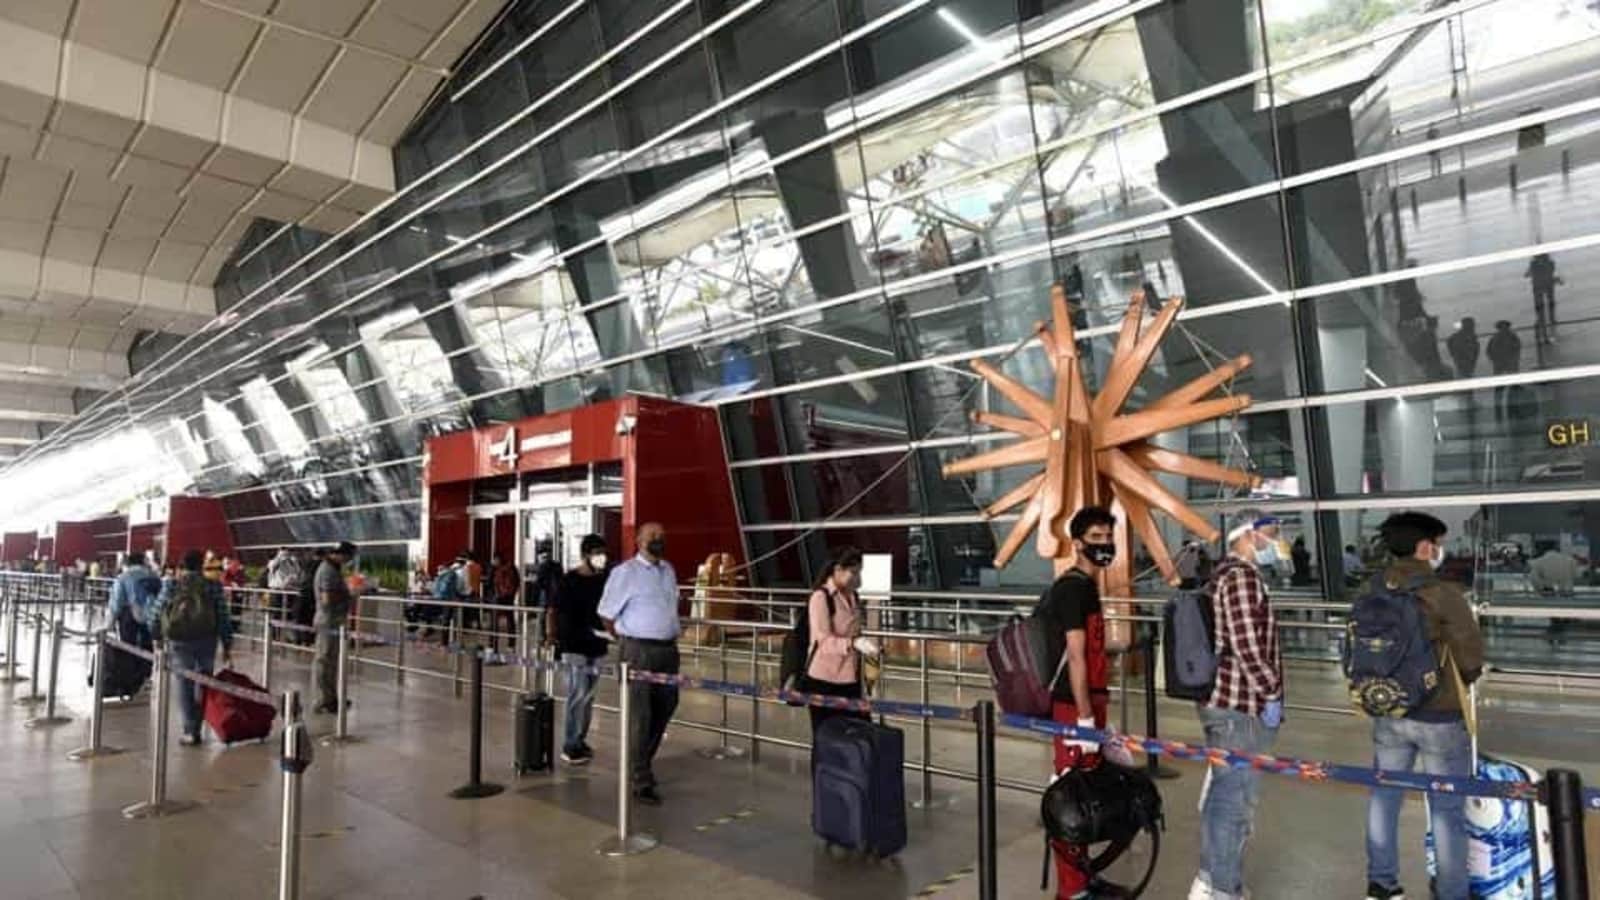 DGCA: Over 50 lakh domestic air passengers in July, 61% higher than June